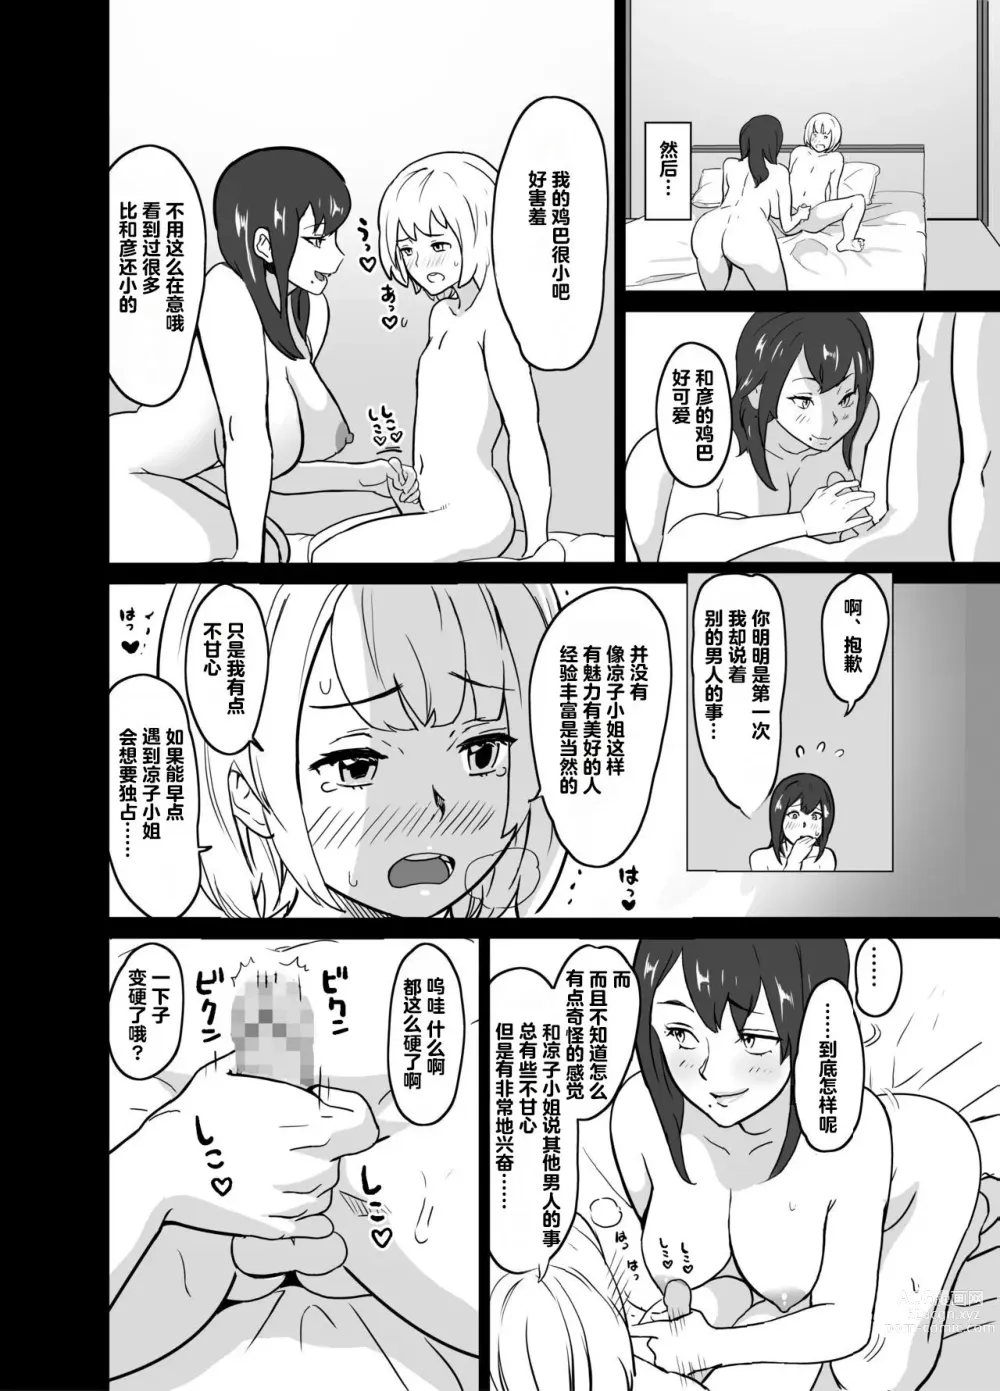 Page 8 of doujinshi older girlfriend who reports cheating while flirting love